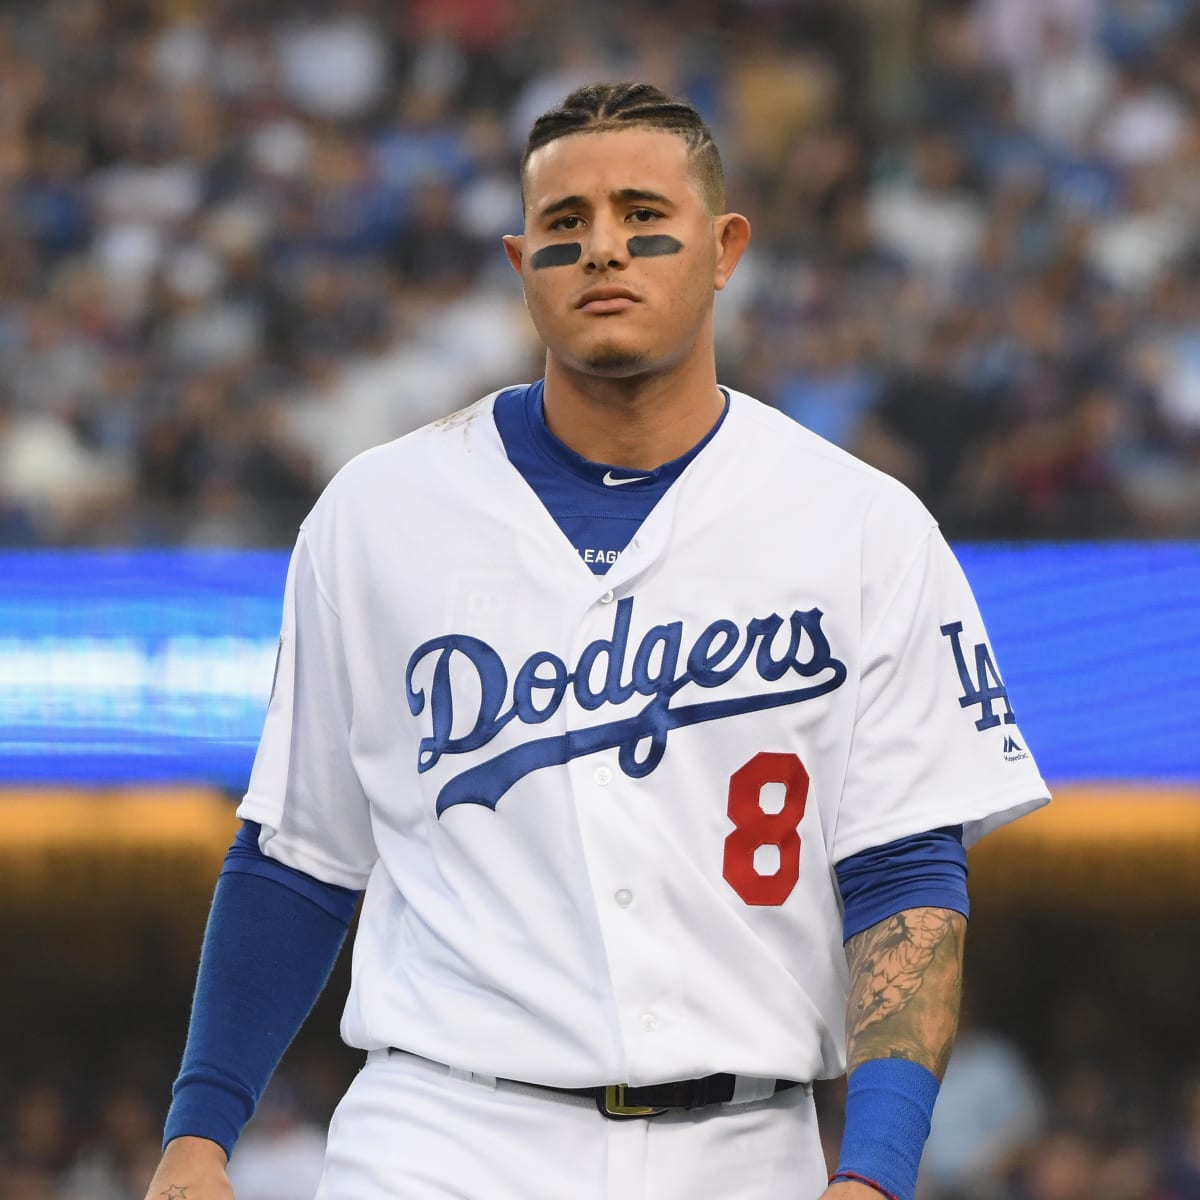 Manny Machado reacts to criticism and concerns about the San Diego